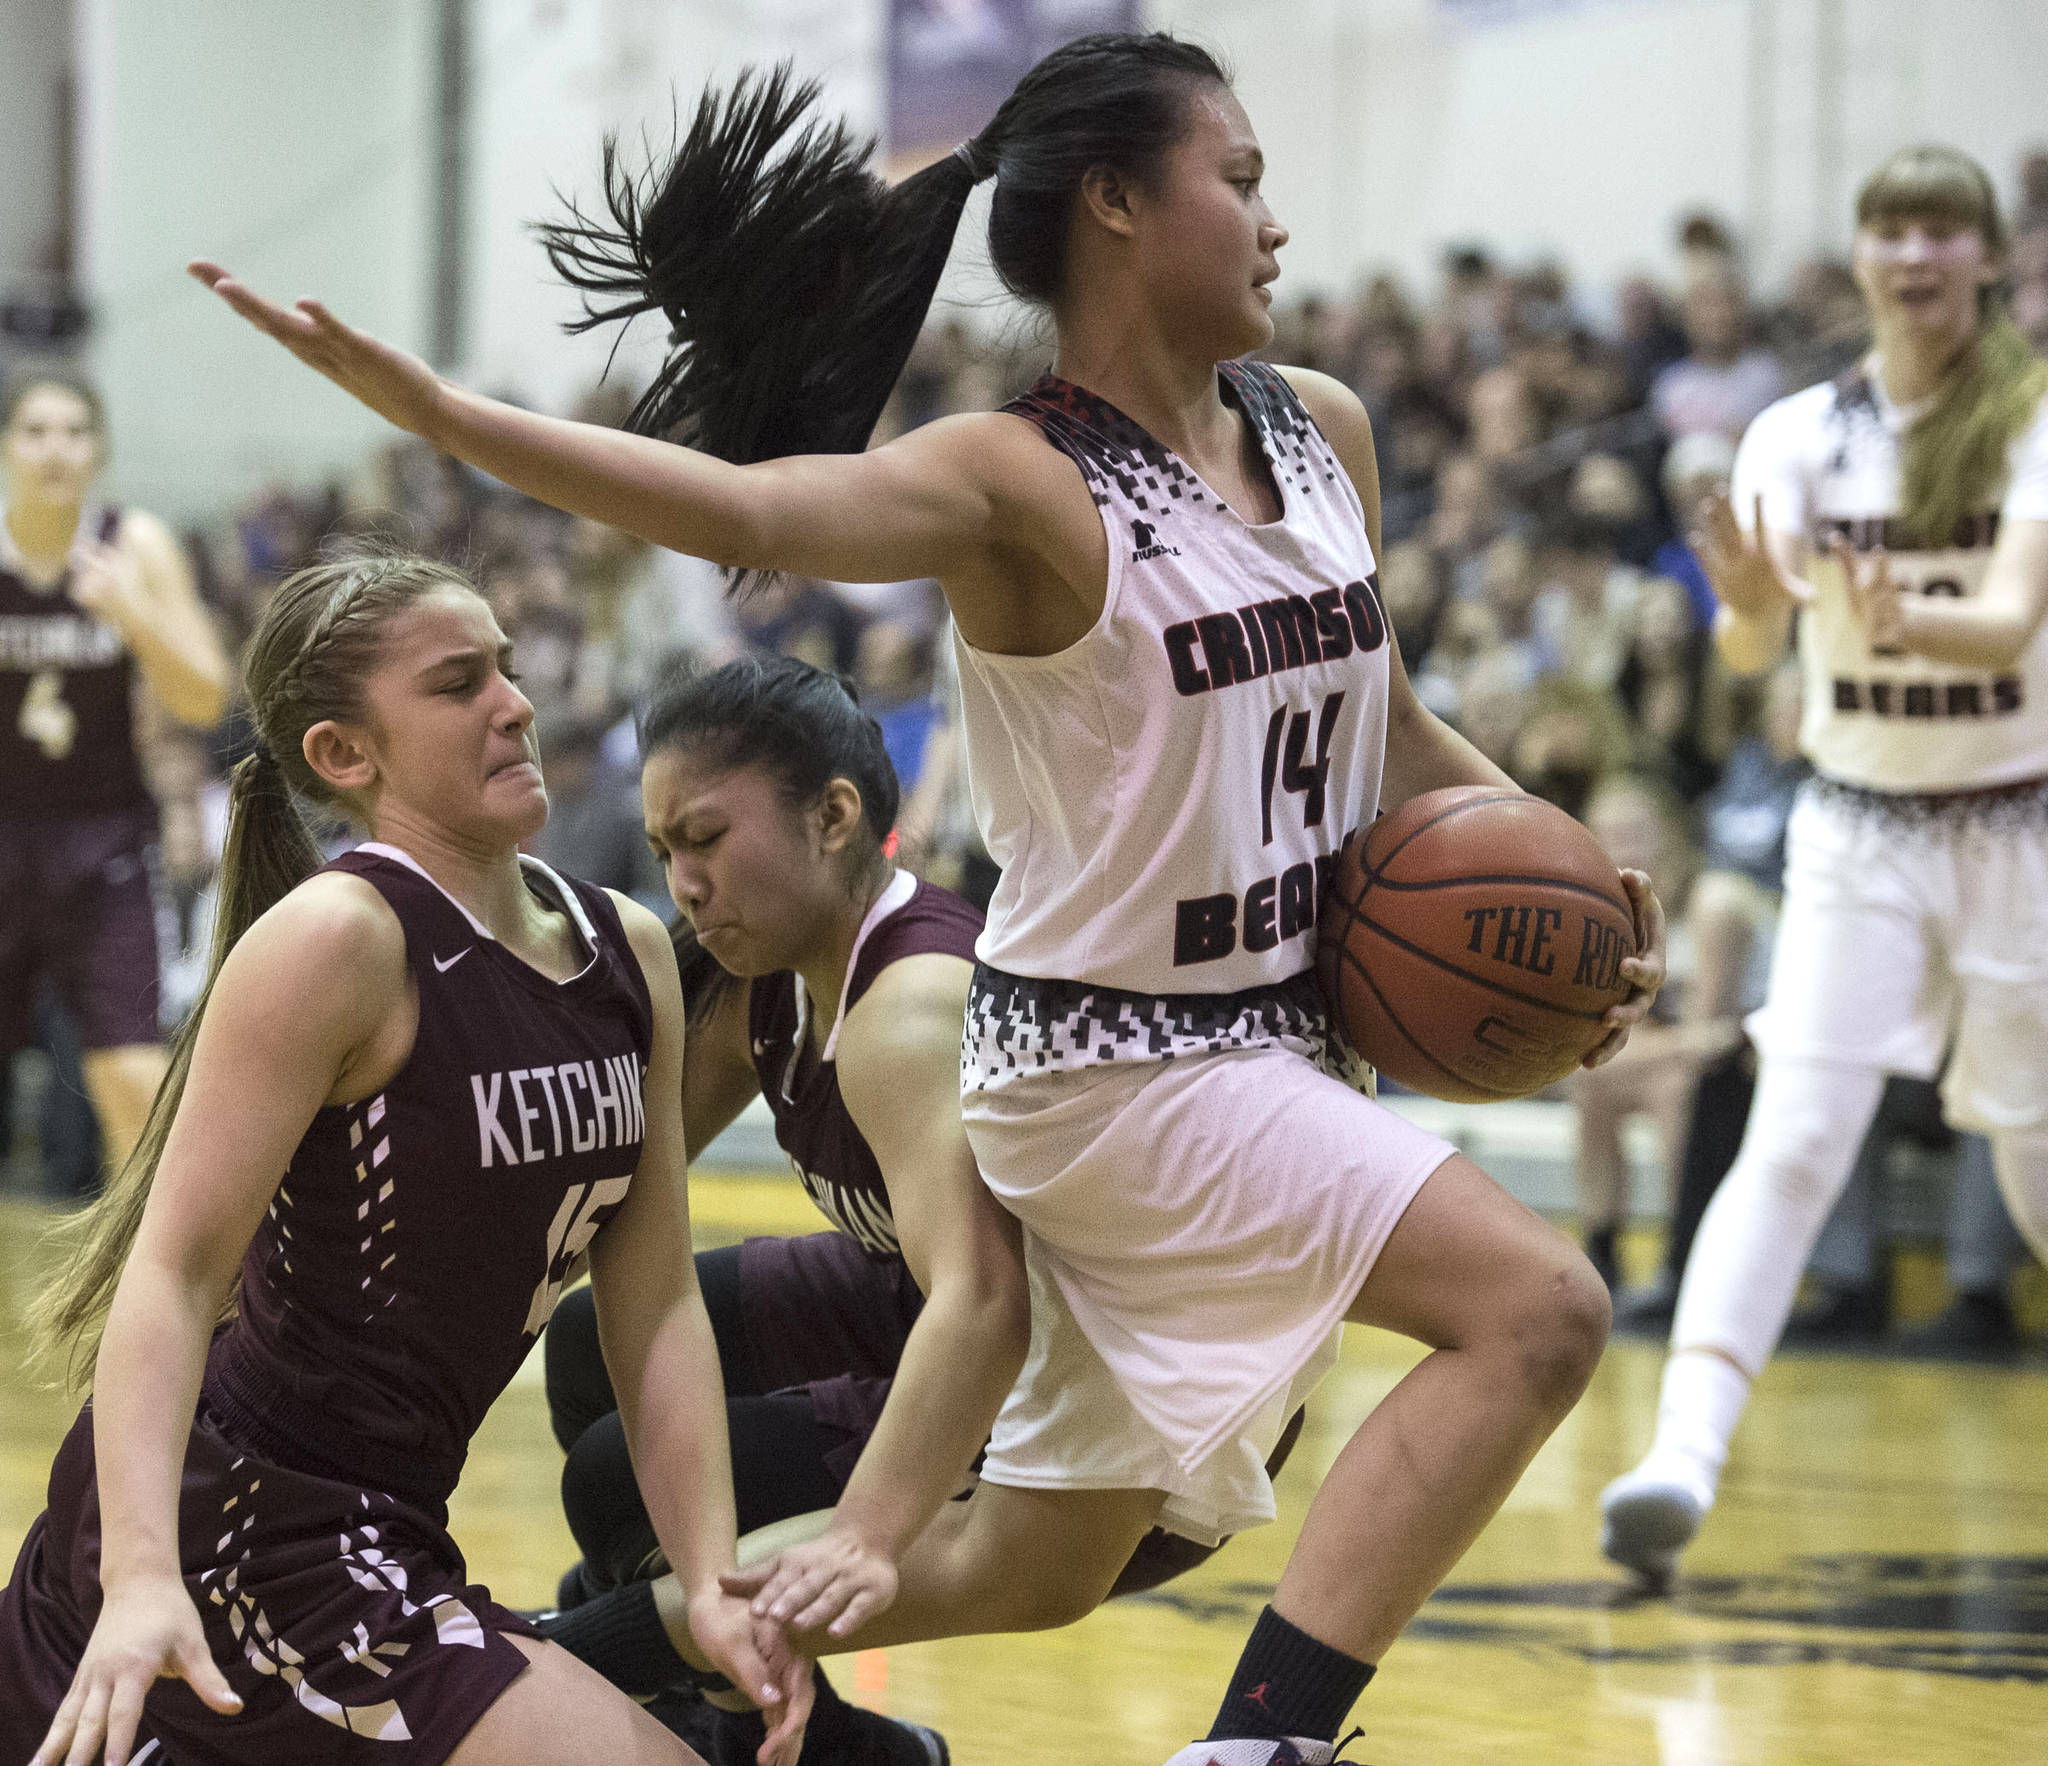 Juneau-Douglas Alyxn Bohulano, right, breaks away from Ketchikan’s Madison Rose, left, and AJ Dela Cruz during the Region V Basketball finals at JDHS on Friday. Ketchikan won 41-39 to force a playoff game on Saturday. (Michael Penn | Juneau Empire)